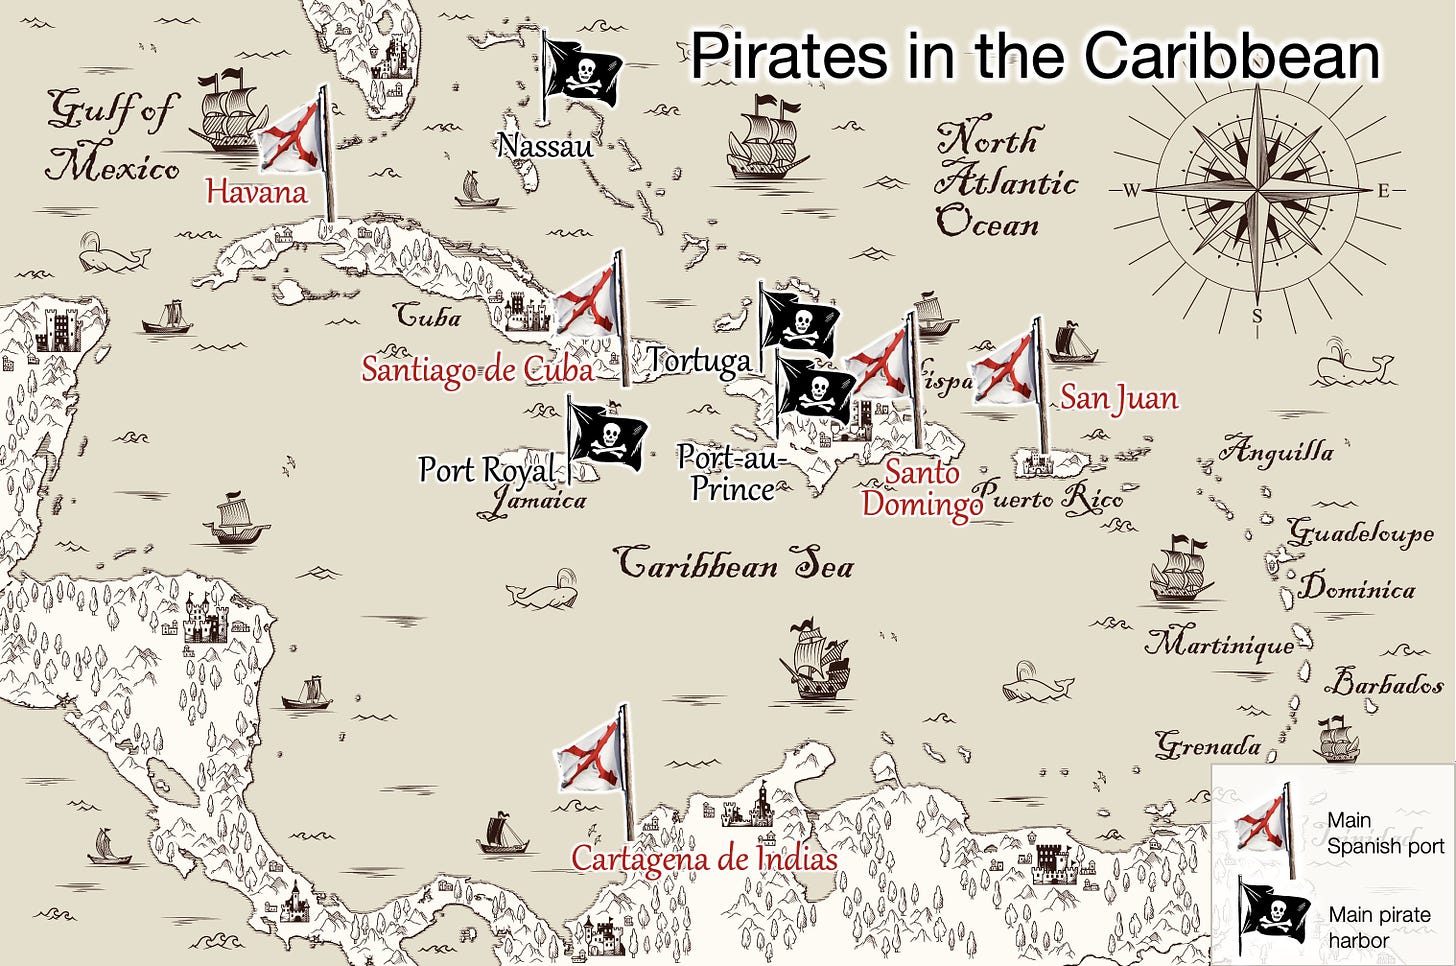 Tomas Pueyo on Twitter: "As a pirate, you want to be as close as possible  to these ports. And that's why their main harbors were in Nassau (Bahamas),  Port-au-Prince (Hispaniola), Tortuga (close